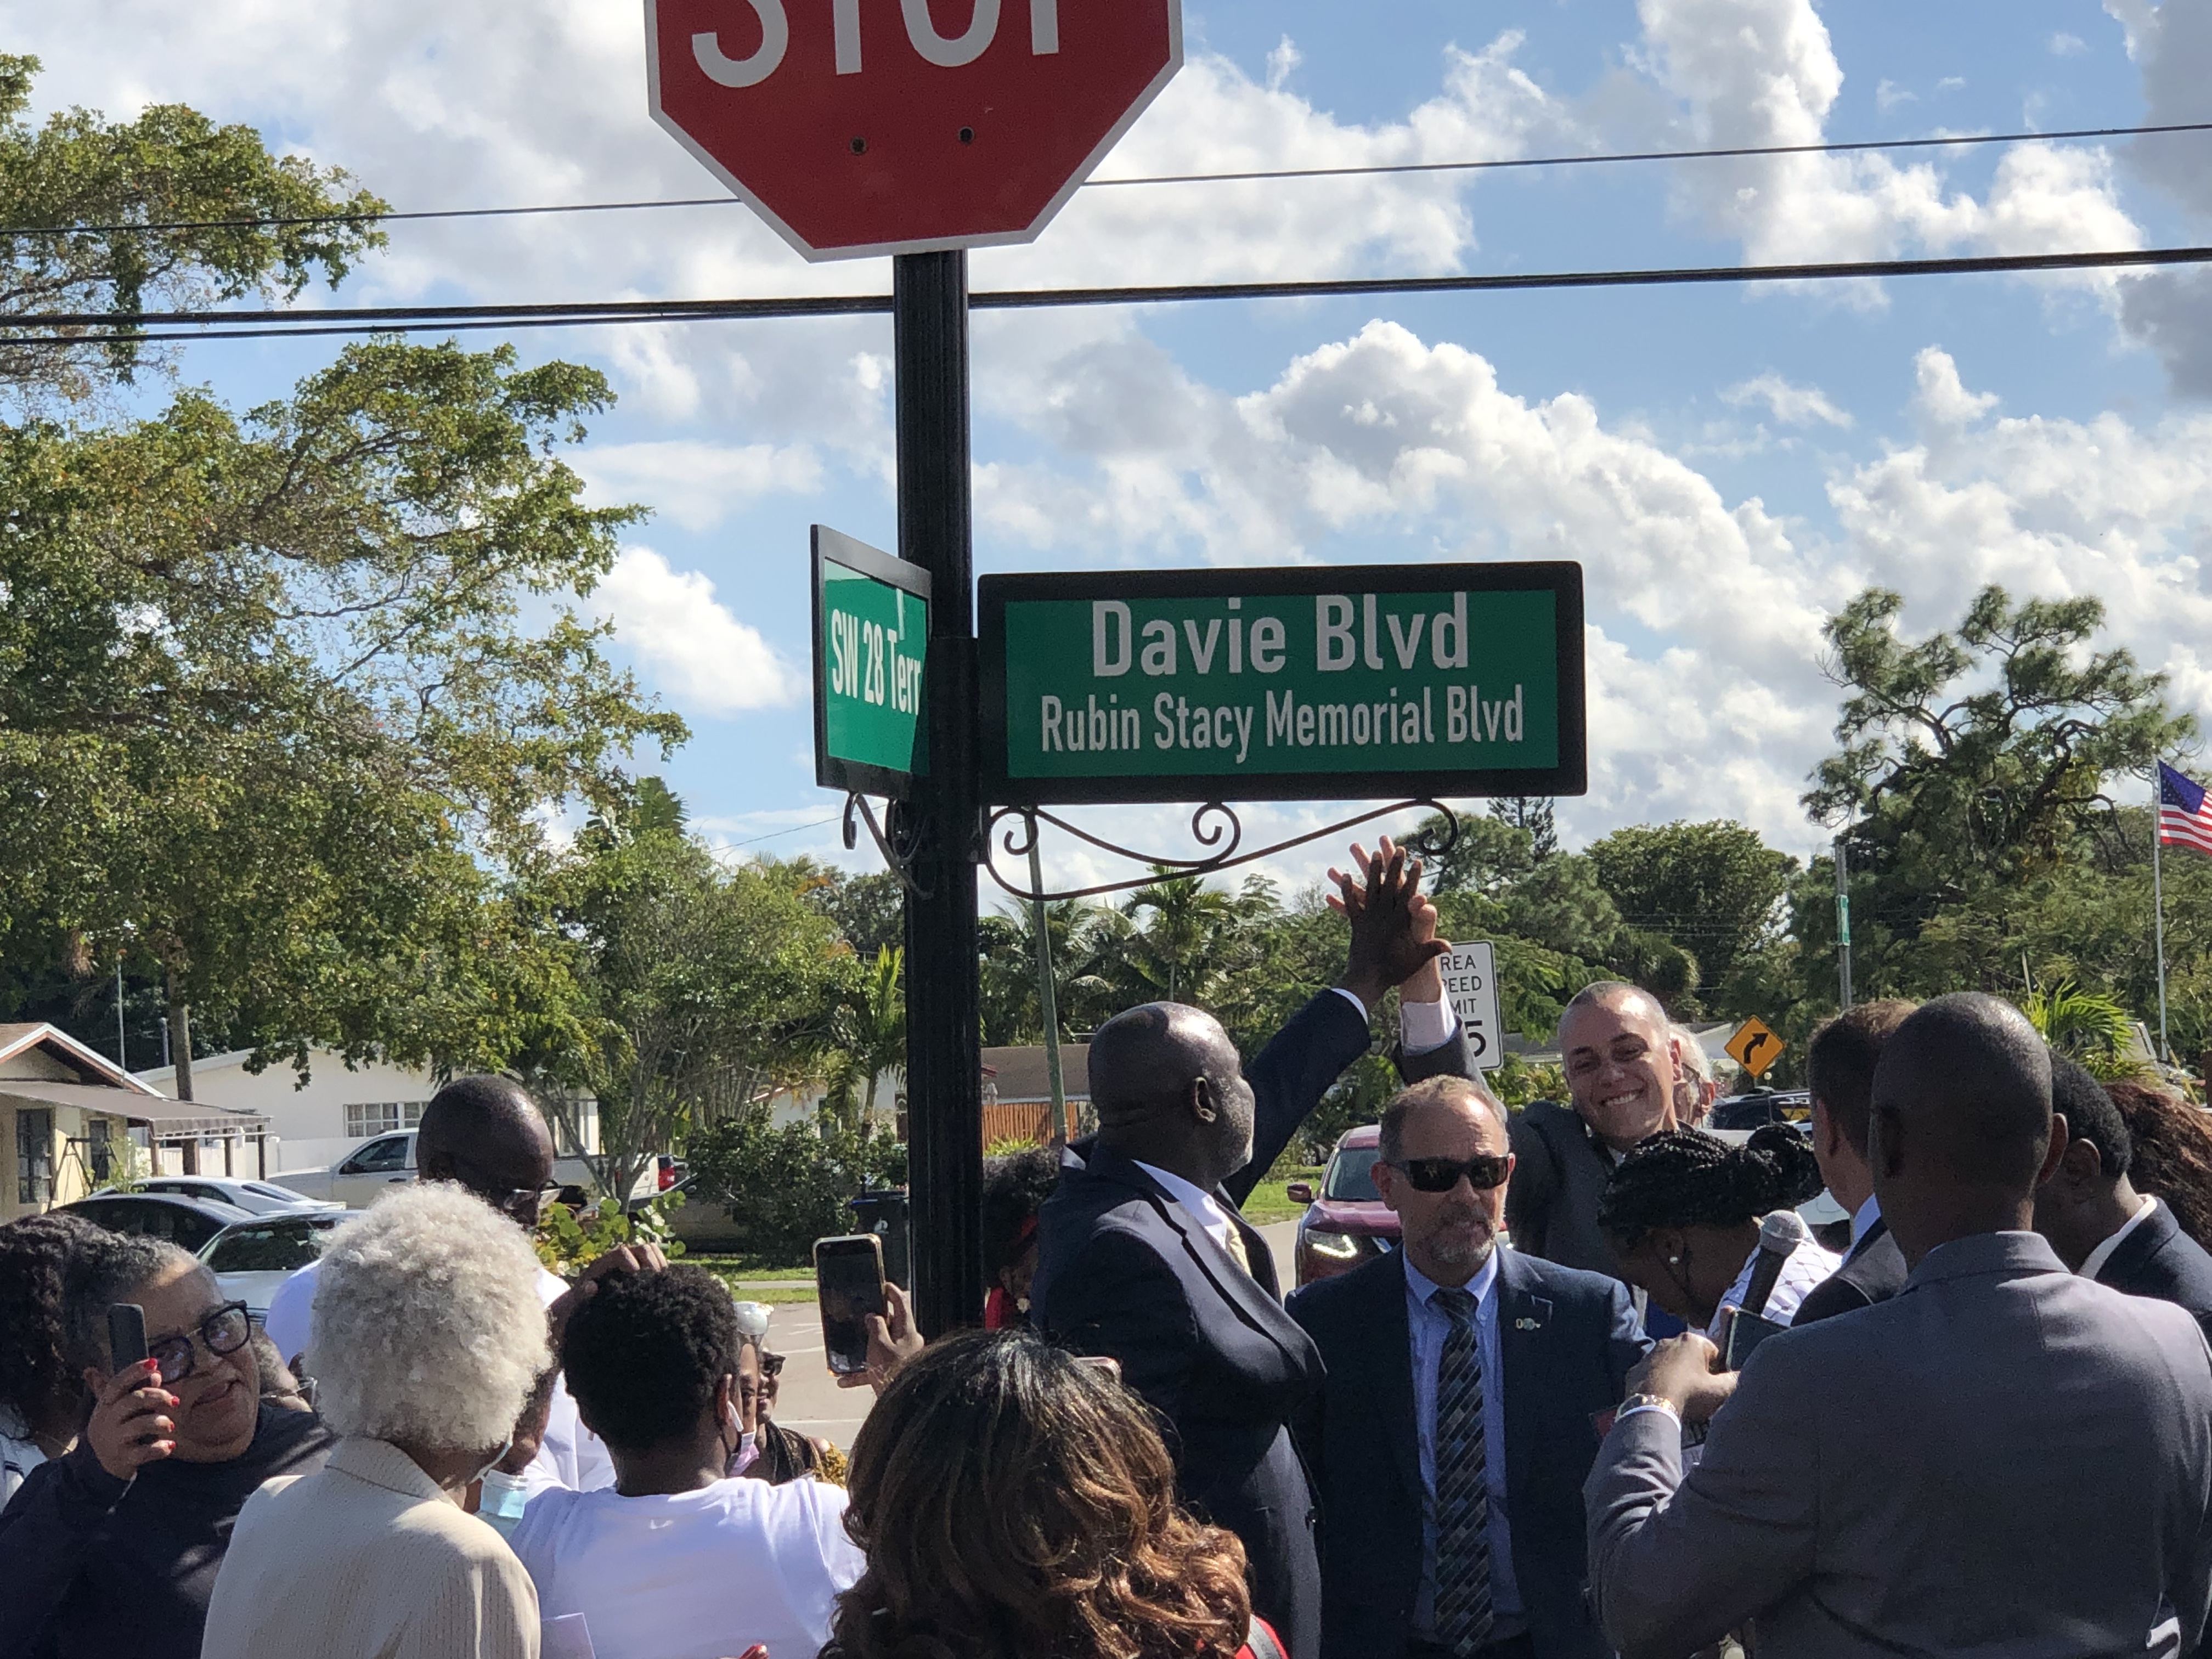 Fort Lauderdale Street Renamed After Lynching Victim Rubin Stacy